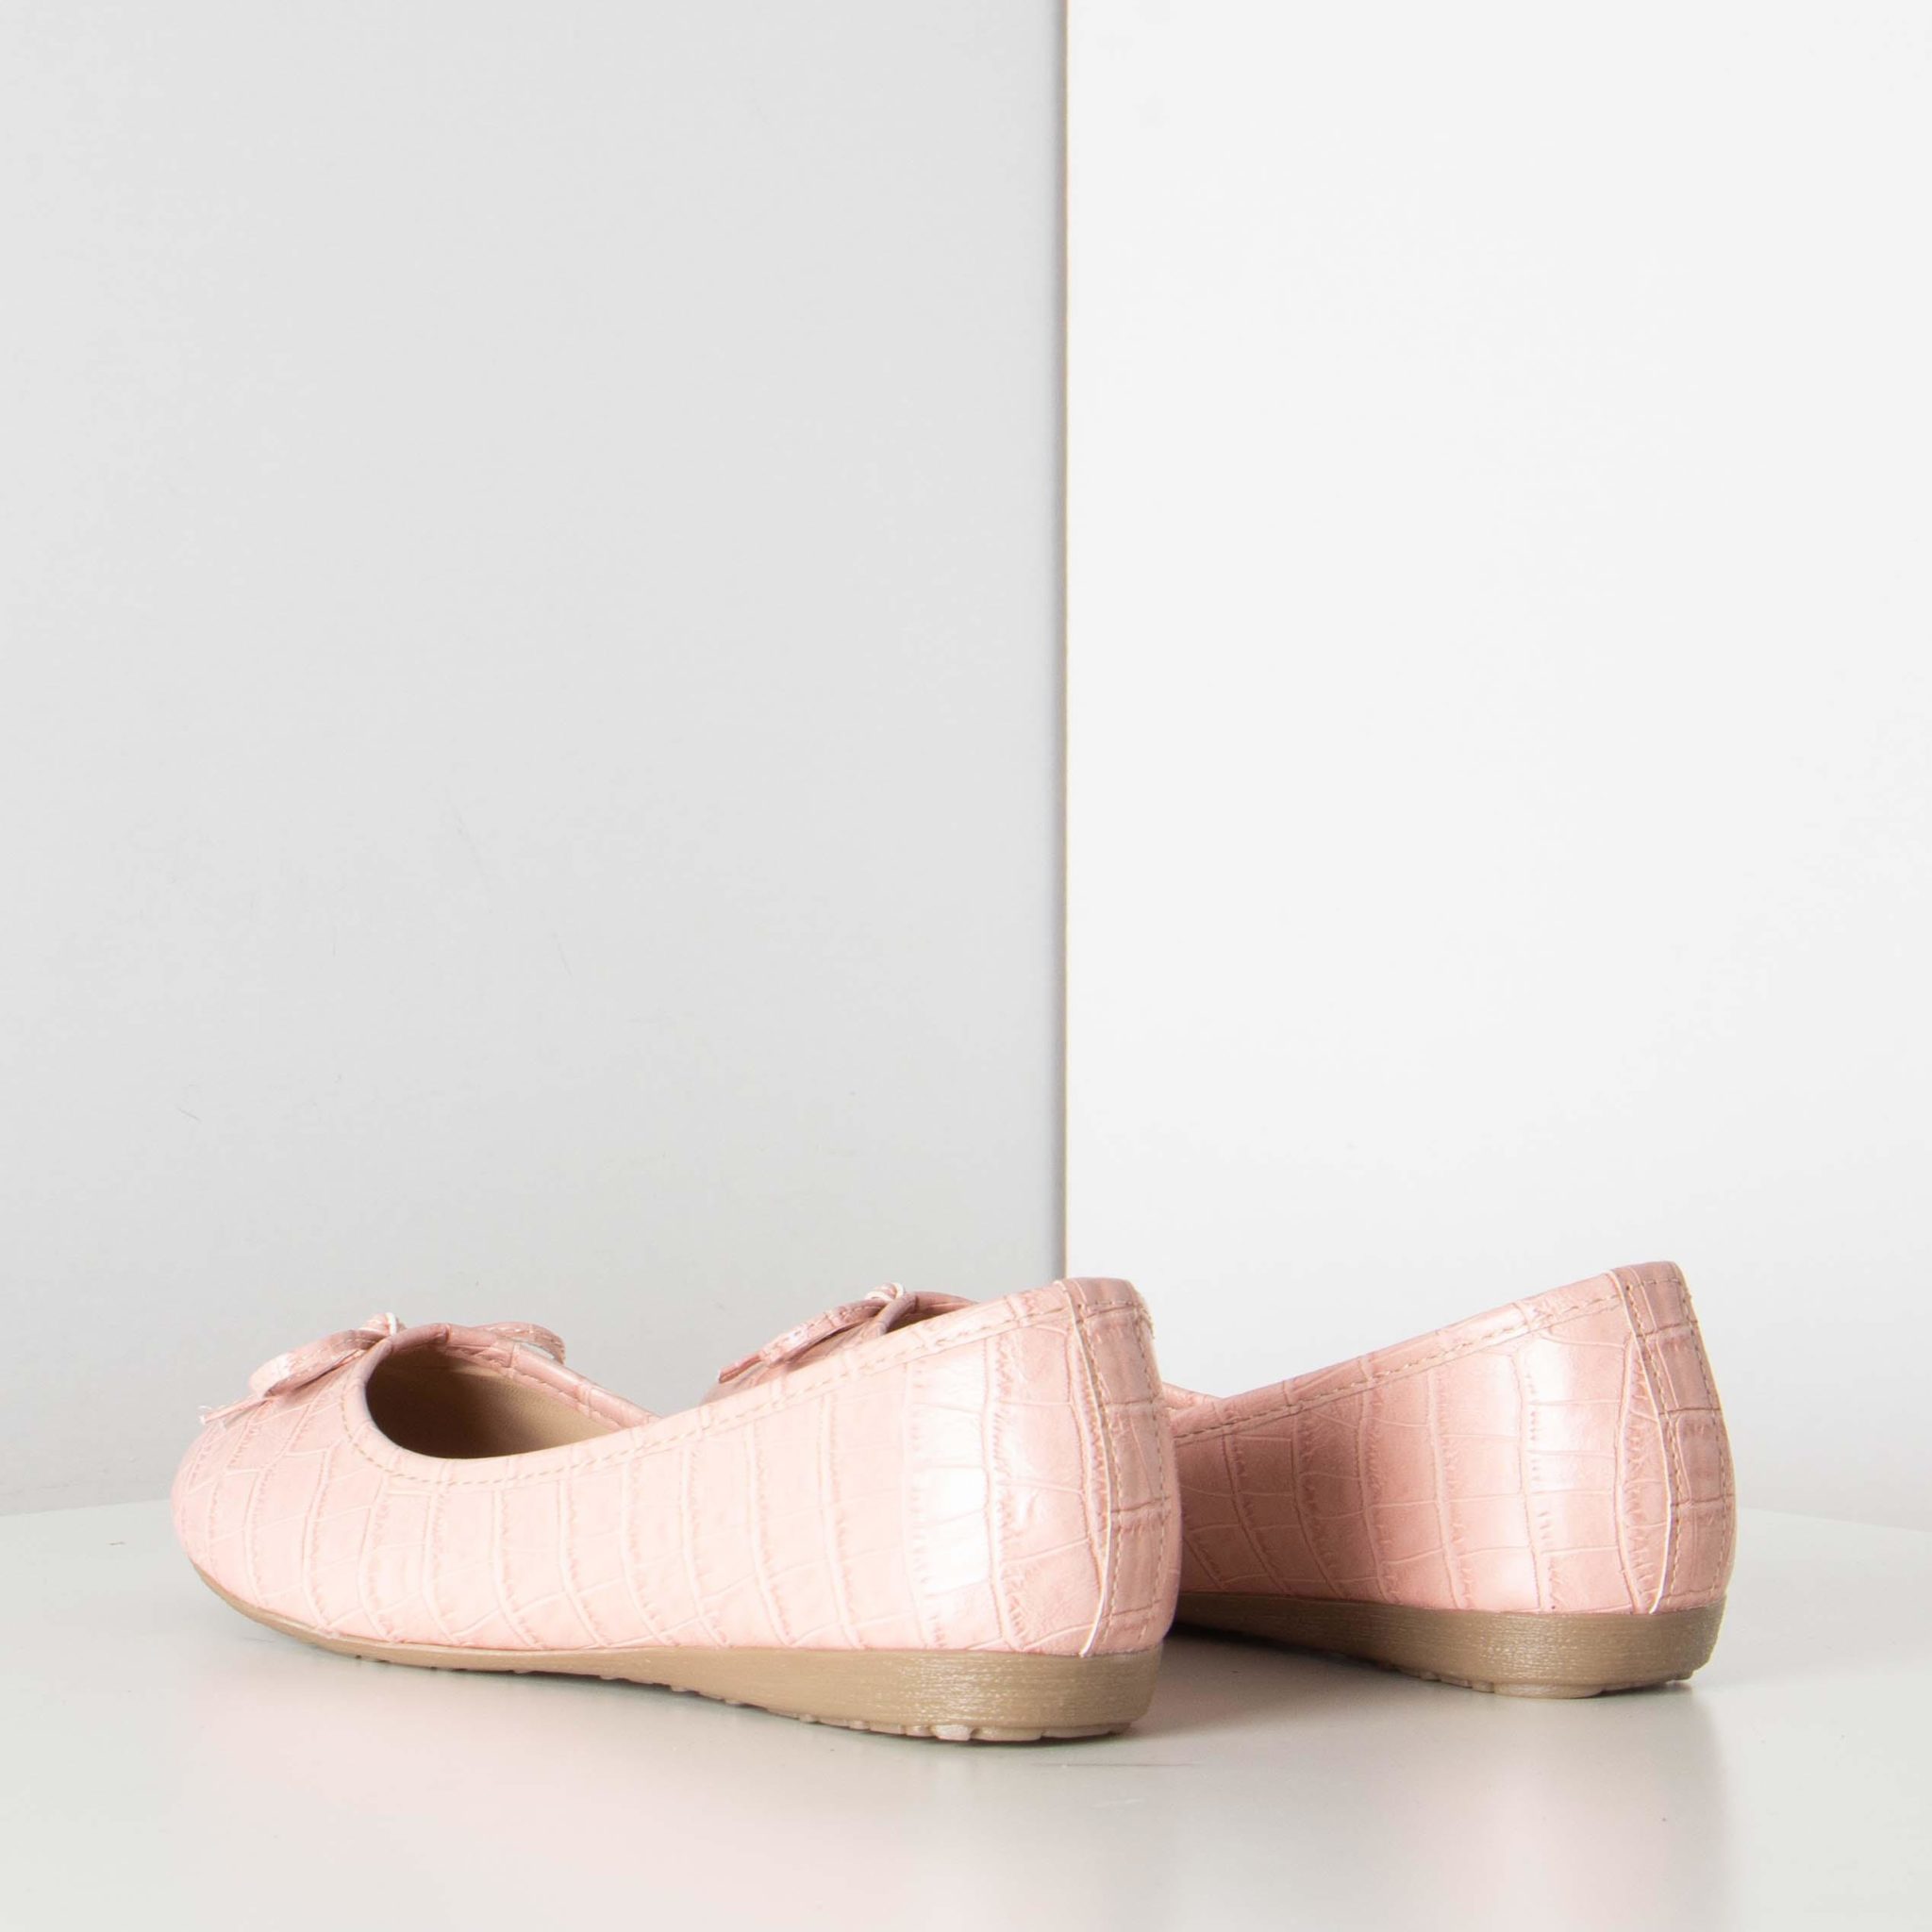 Chaussures Ballerines Ballerines à lacets Bershka Ballerines \u00e0 lacets rose chair-rose style d\u00e9contract\u00e9 